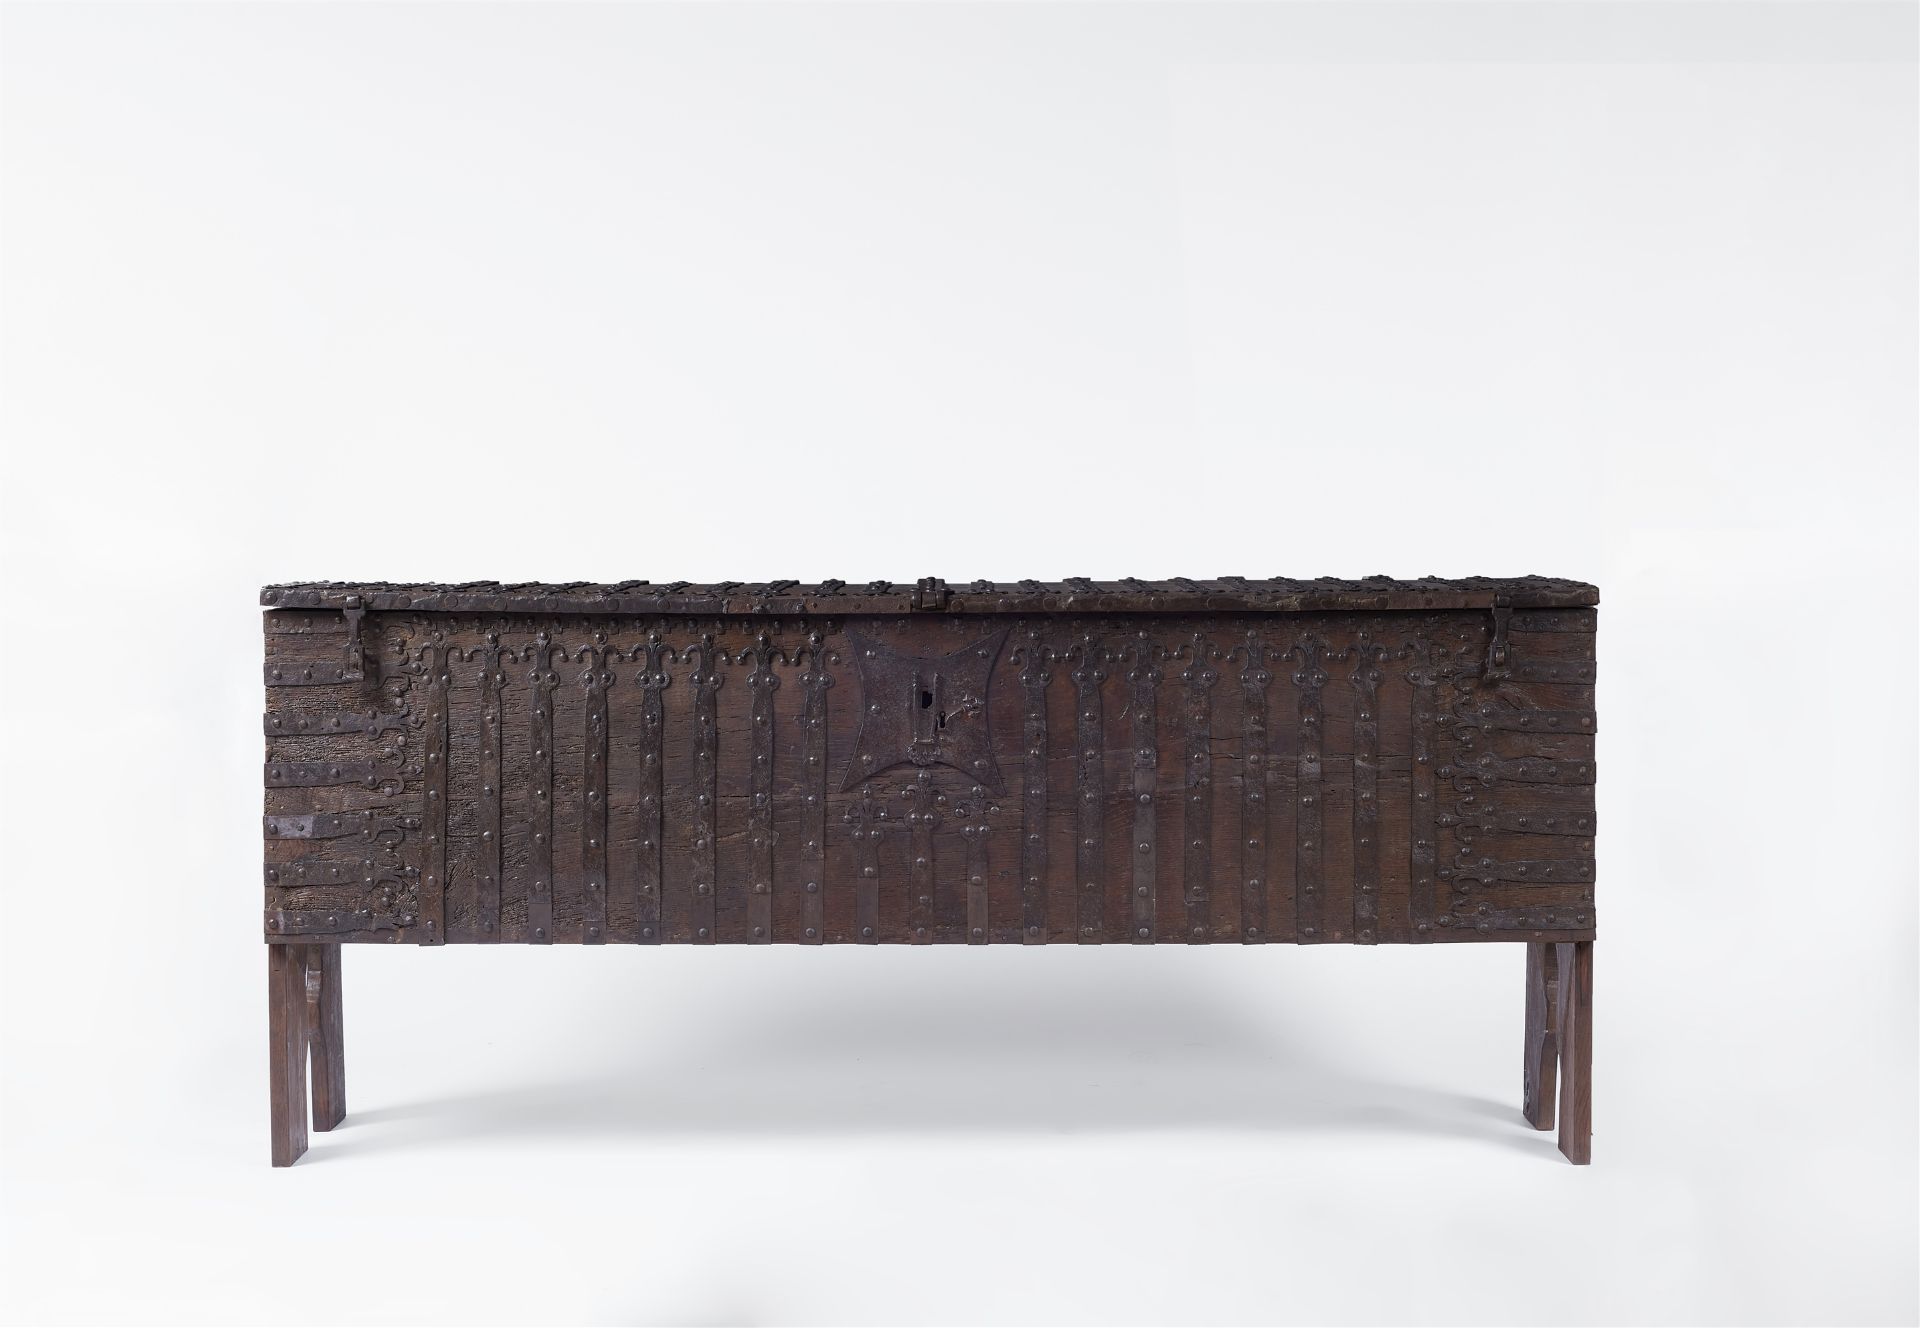 A large Gothic oak chest with iron mountings